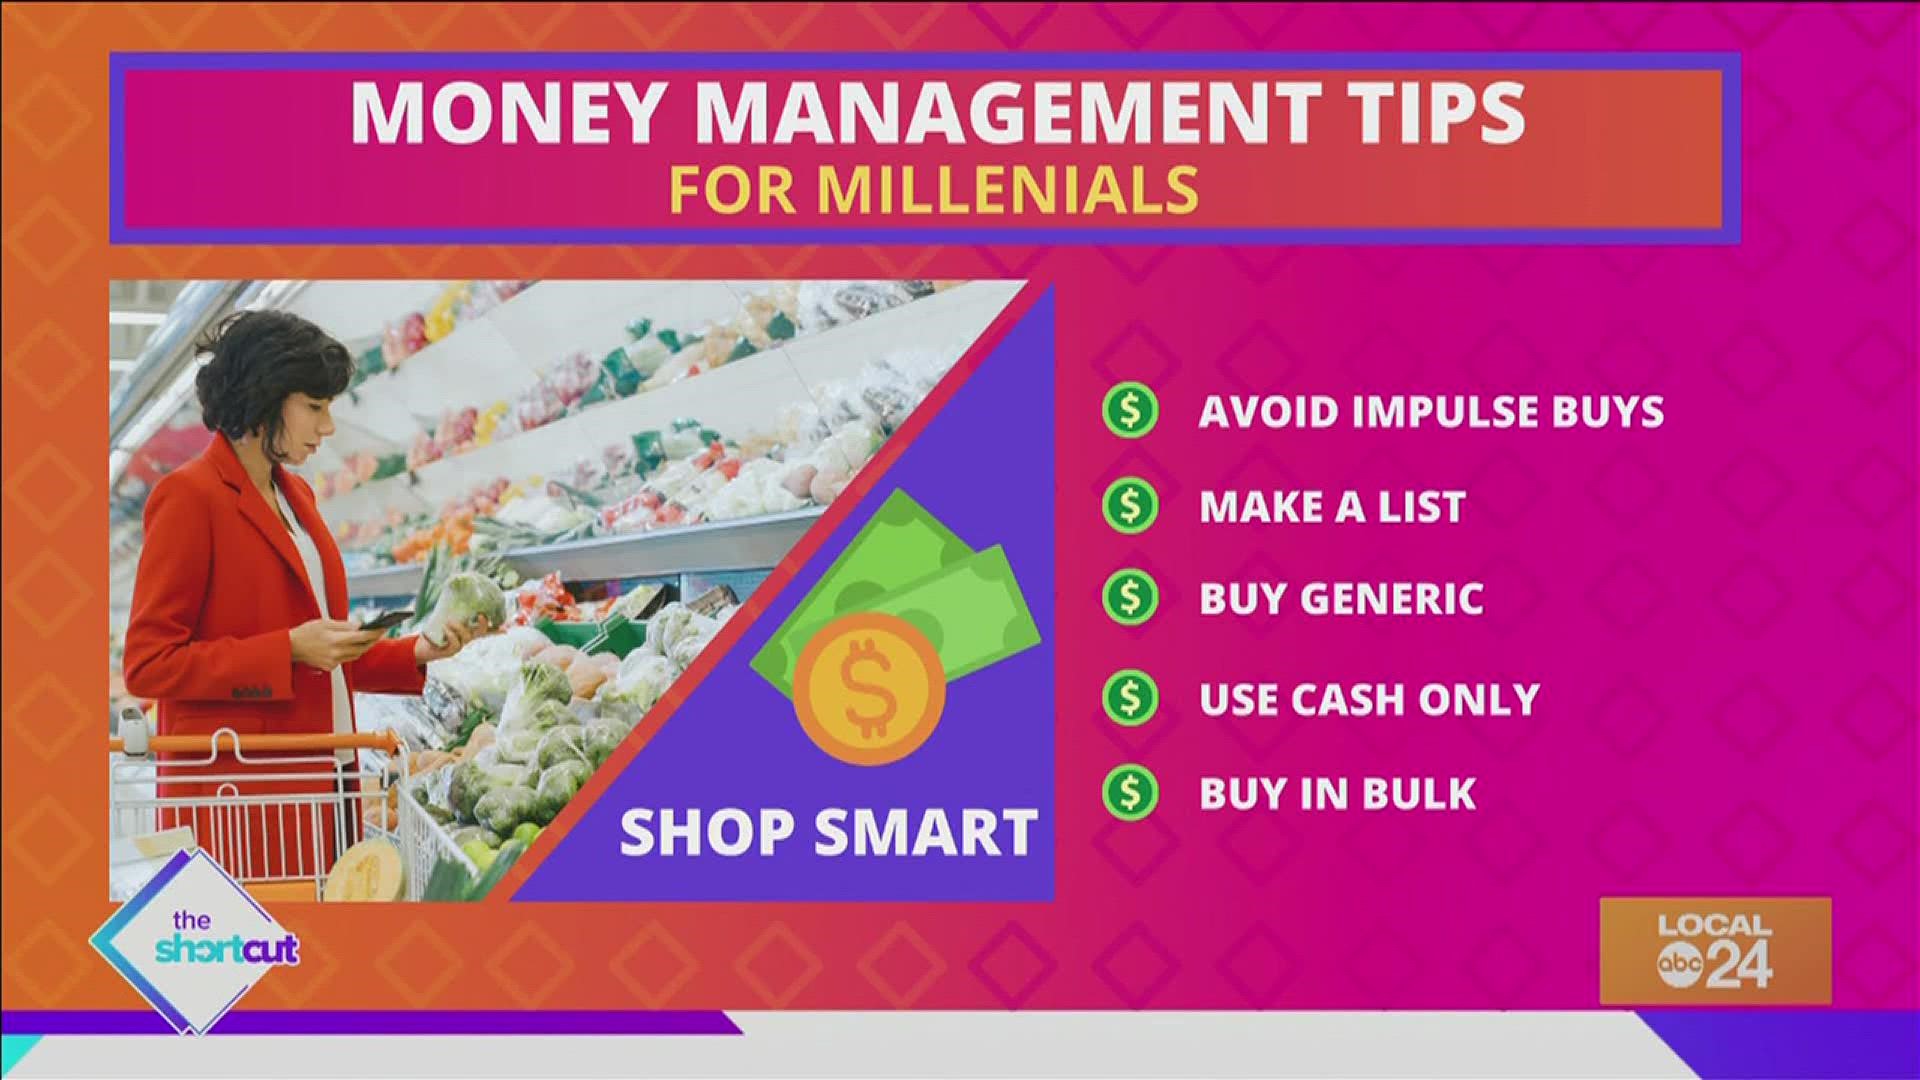 Whether you're working to get out of debt or increase your wealth, use these millennial money management tips to get you to where you need to be!